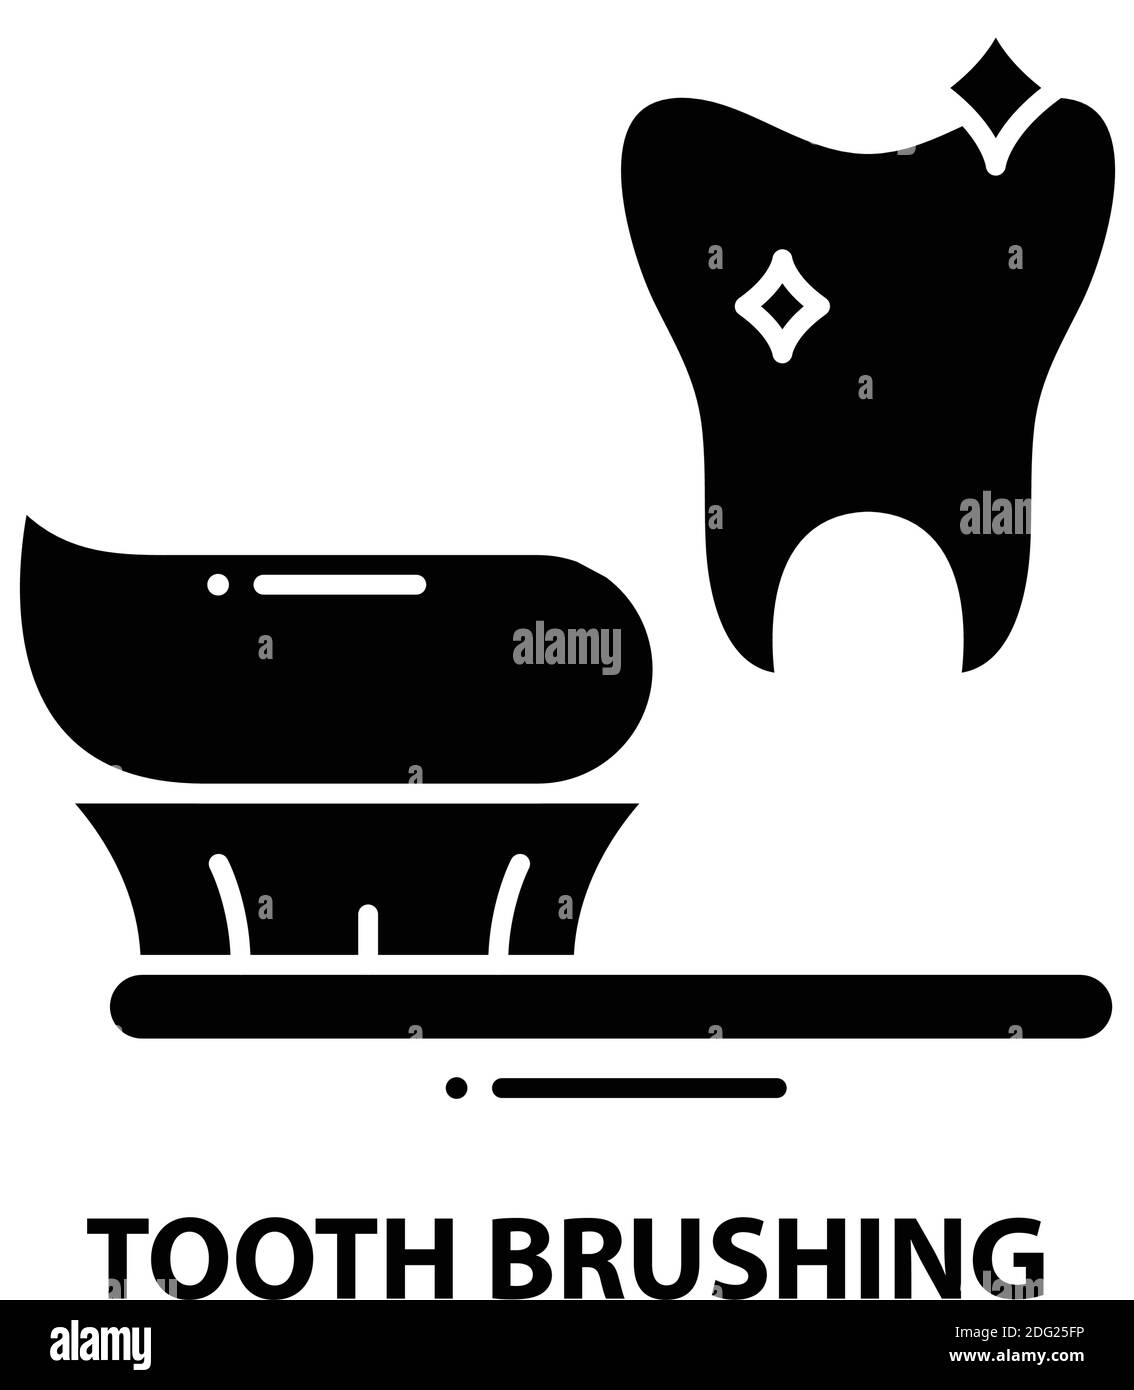 tooth brushing icon, black vector sign with editable strokes, concept illustration Stock Vector